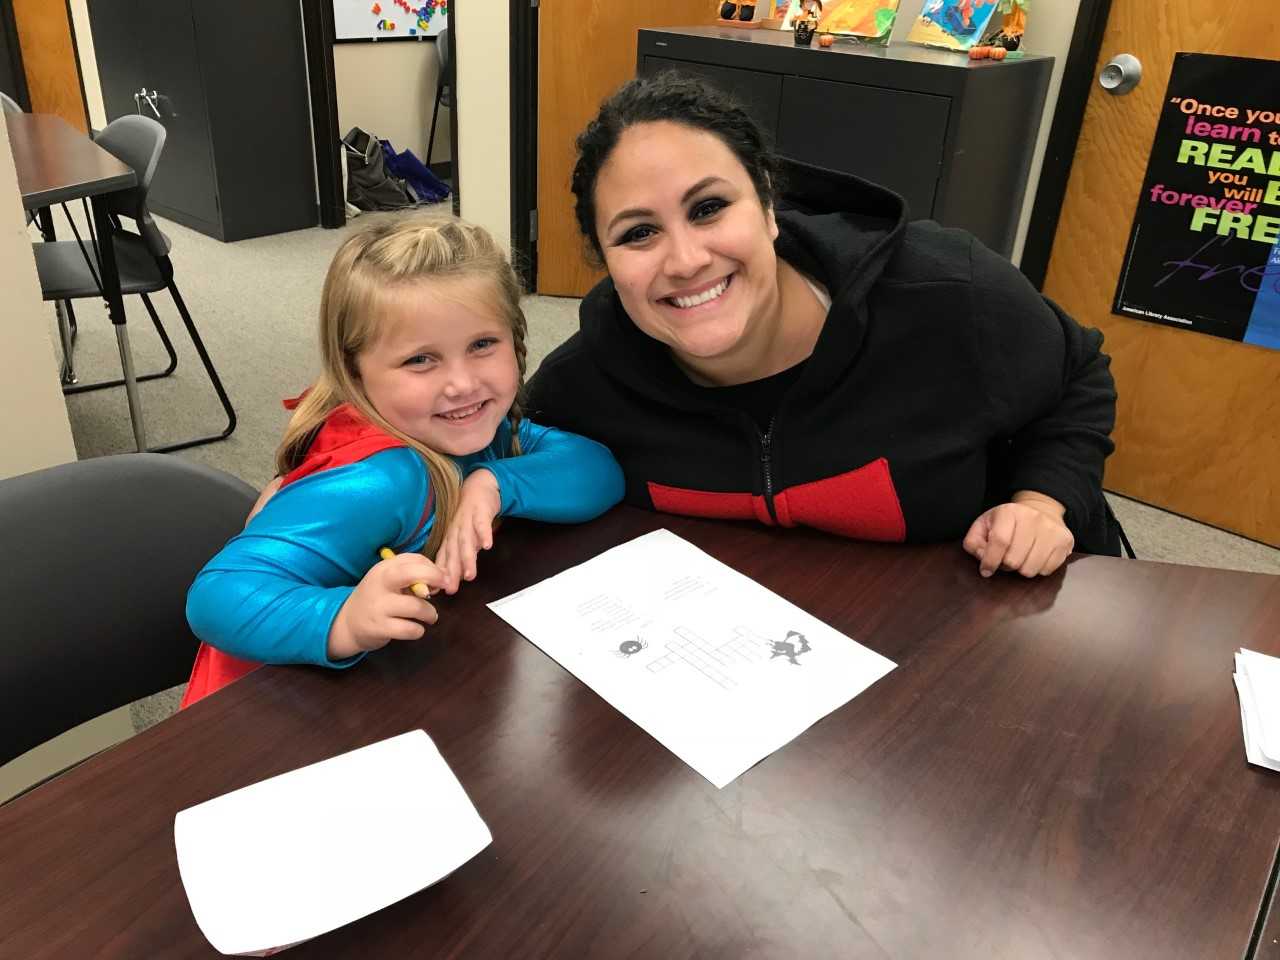 A tutor and a girl smiling and writing a spelling puzzle